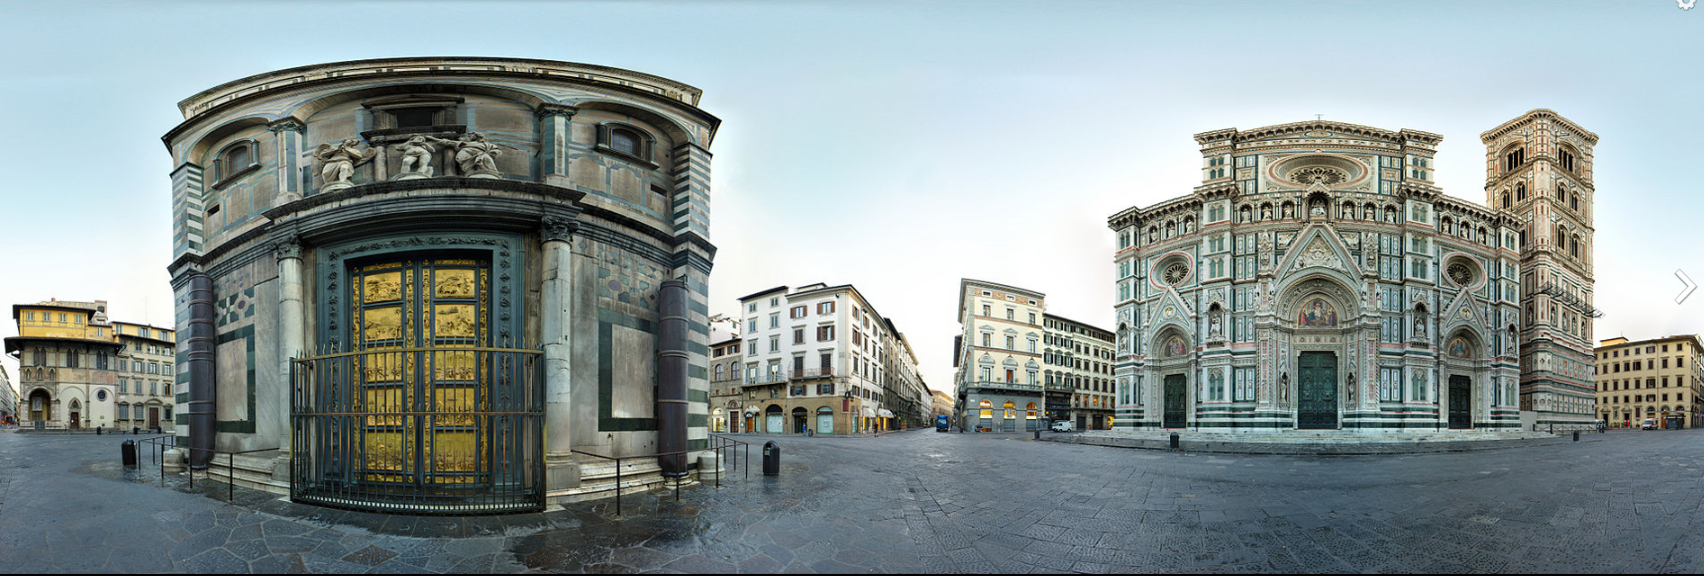 florence baptisterium and cathedral.png